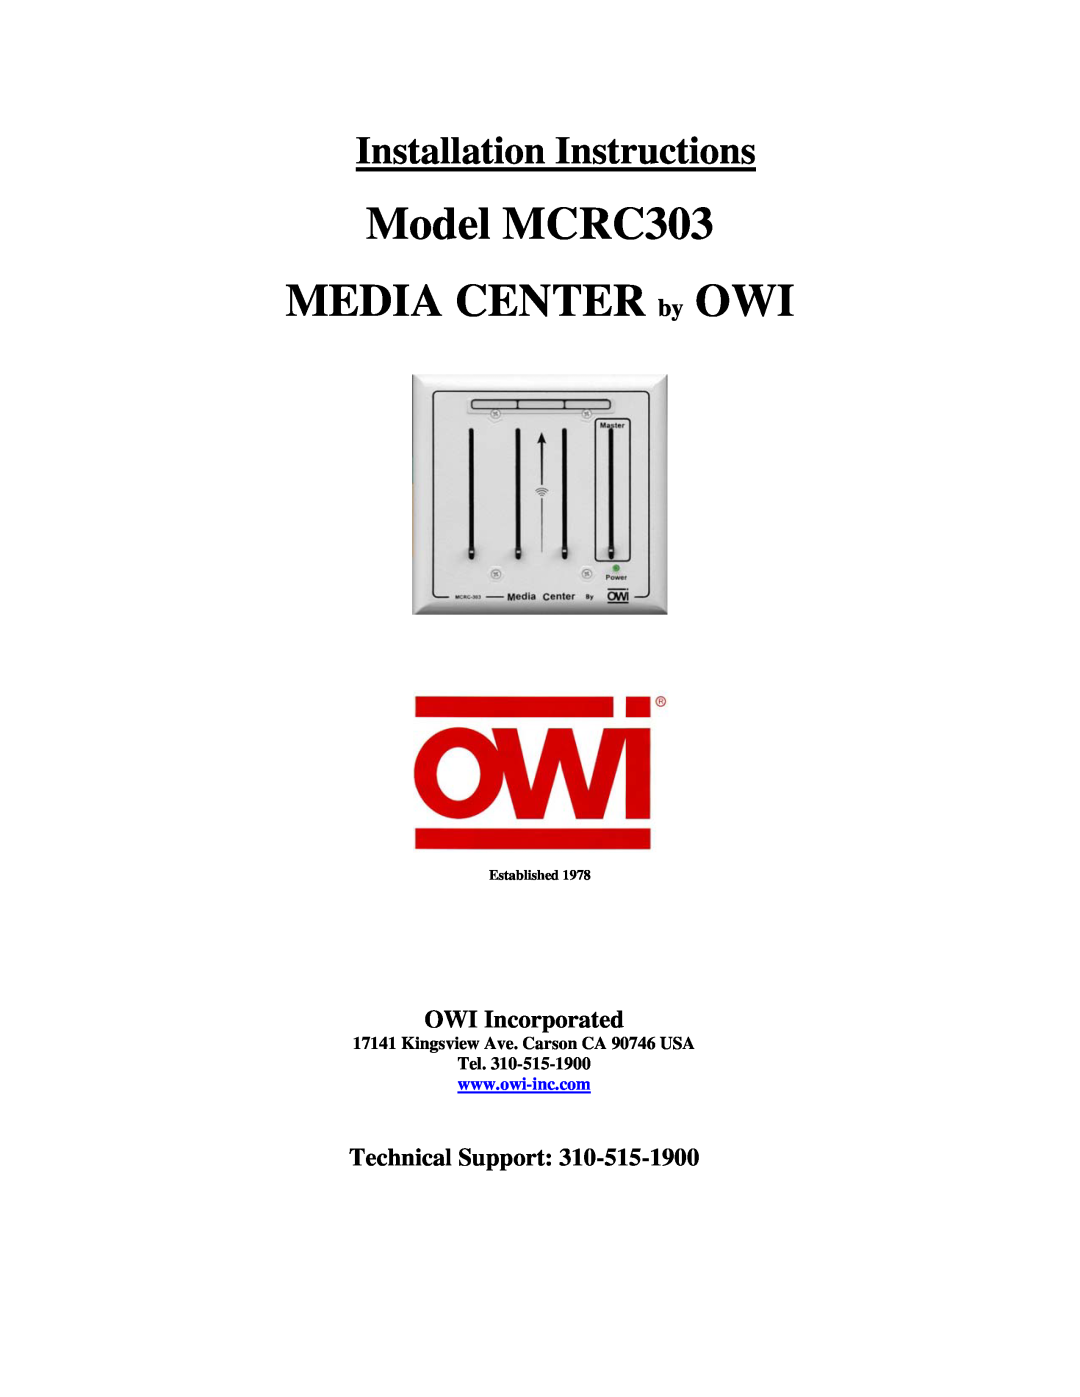 OWI installation instructions OWI Incorporated, Technical Support, Model MCRC303 MEDIA CENTER by OWI, Established 